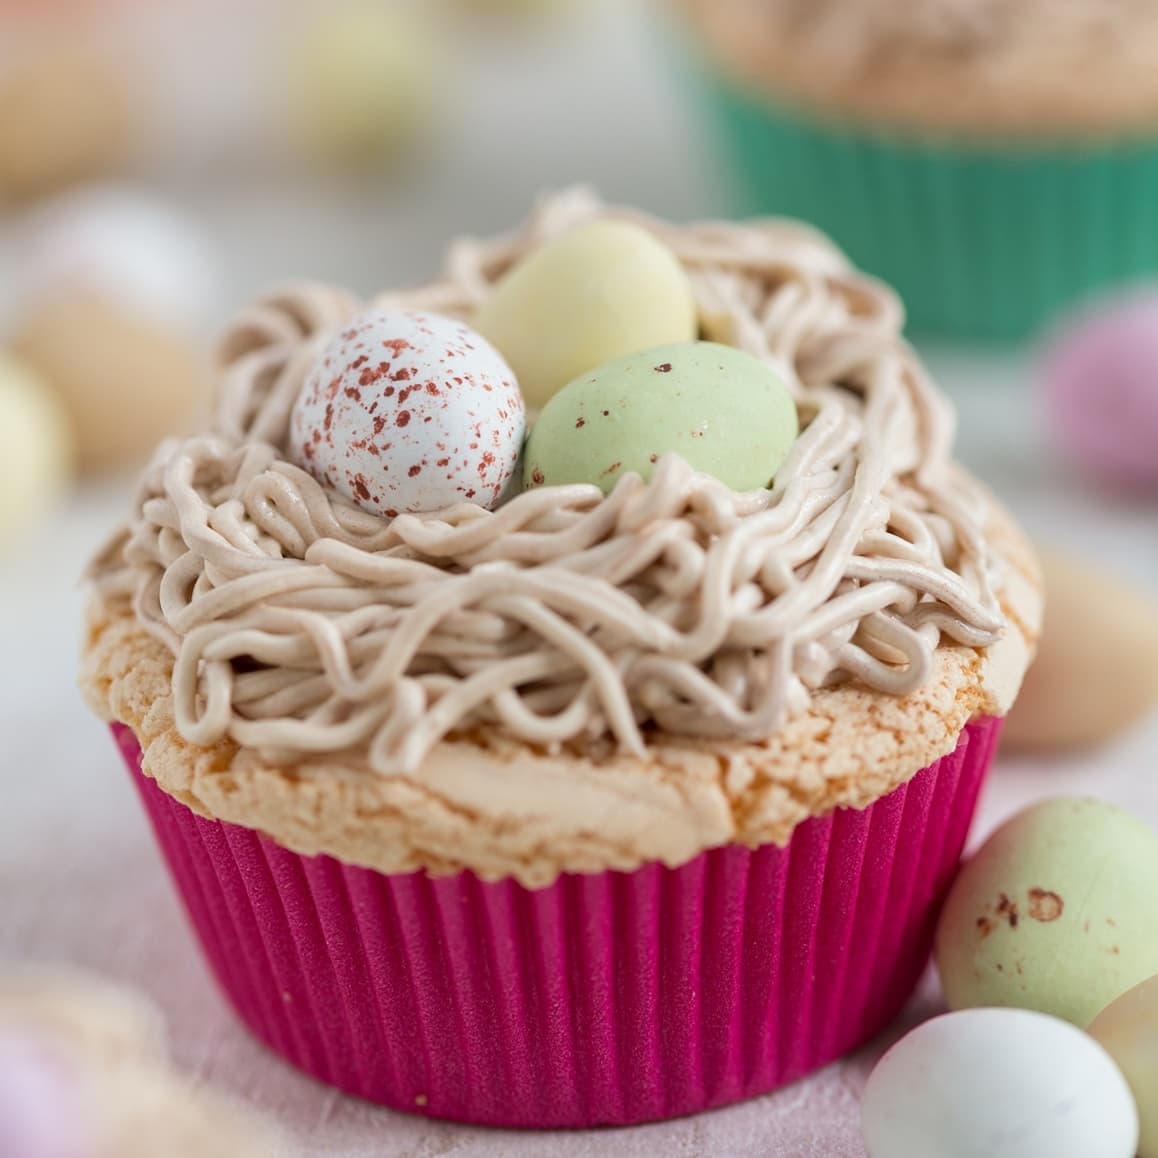 Bird's nest cupcake. Egg cake topped with a buttercream nest and egg chocolates.